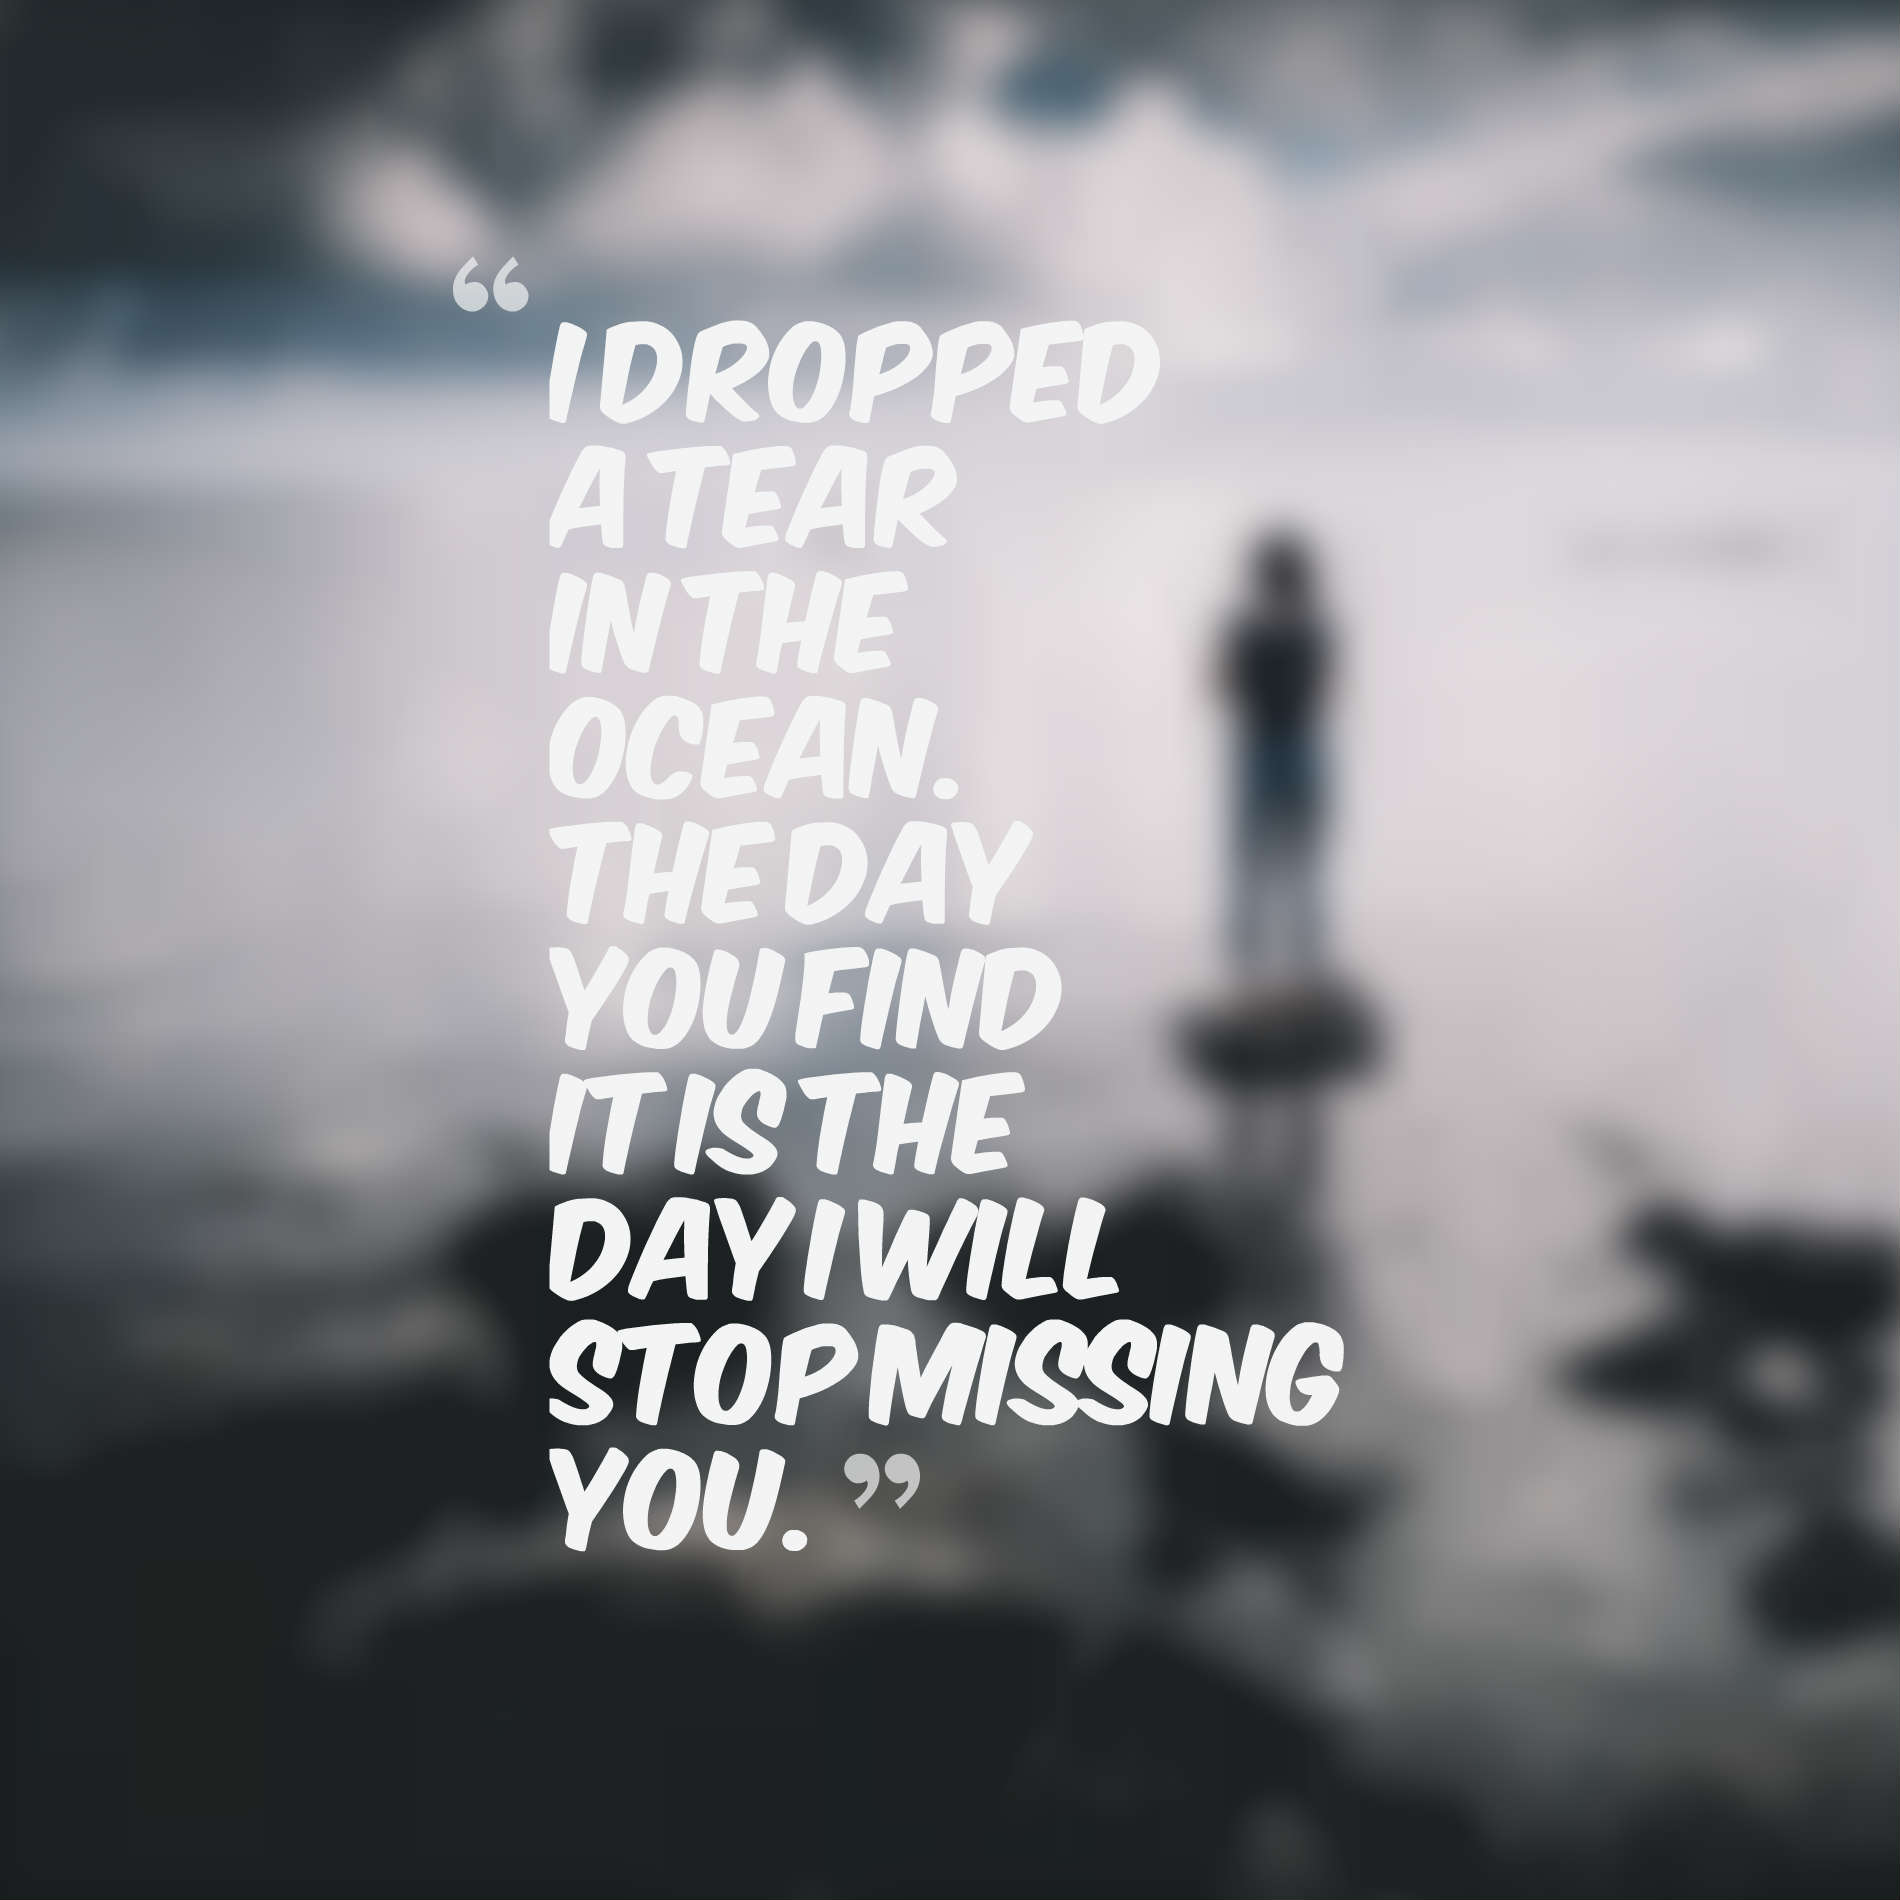 I dropped a tear in the ocean. The day you find it is the day I will stop missing you.